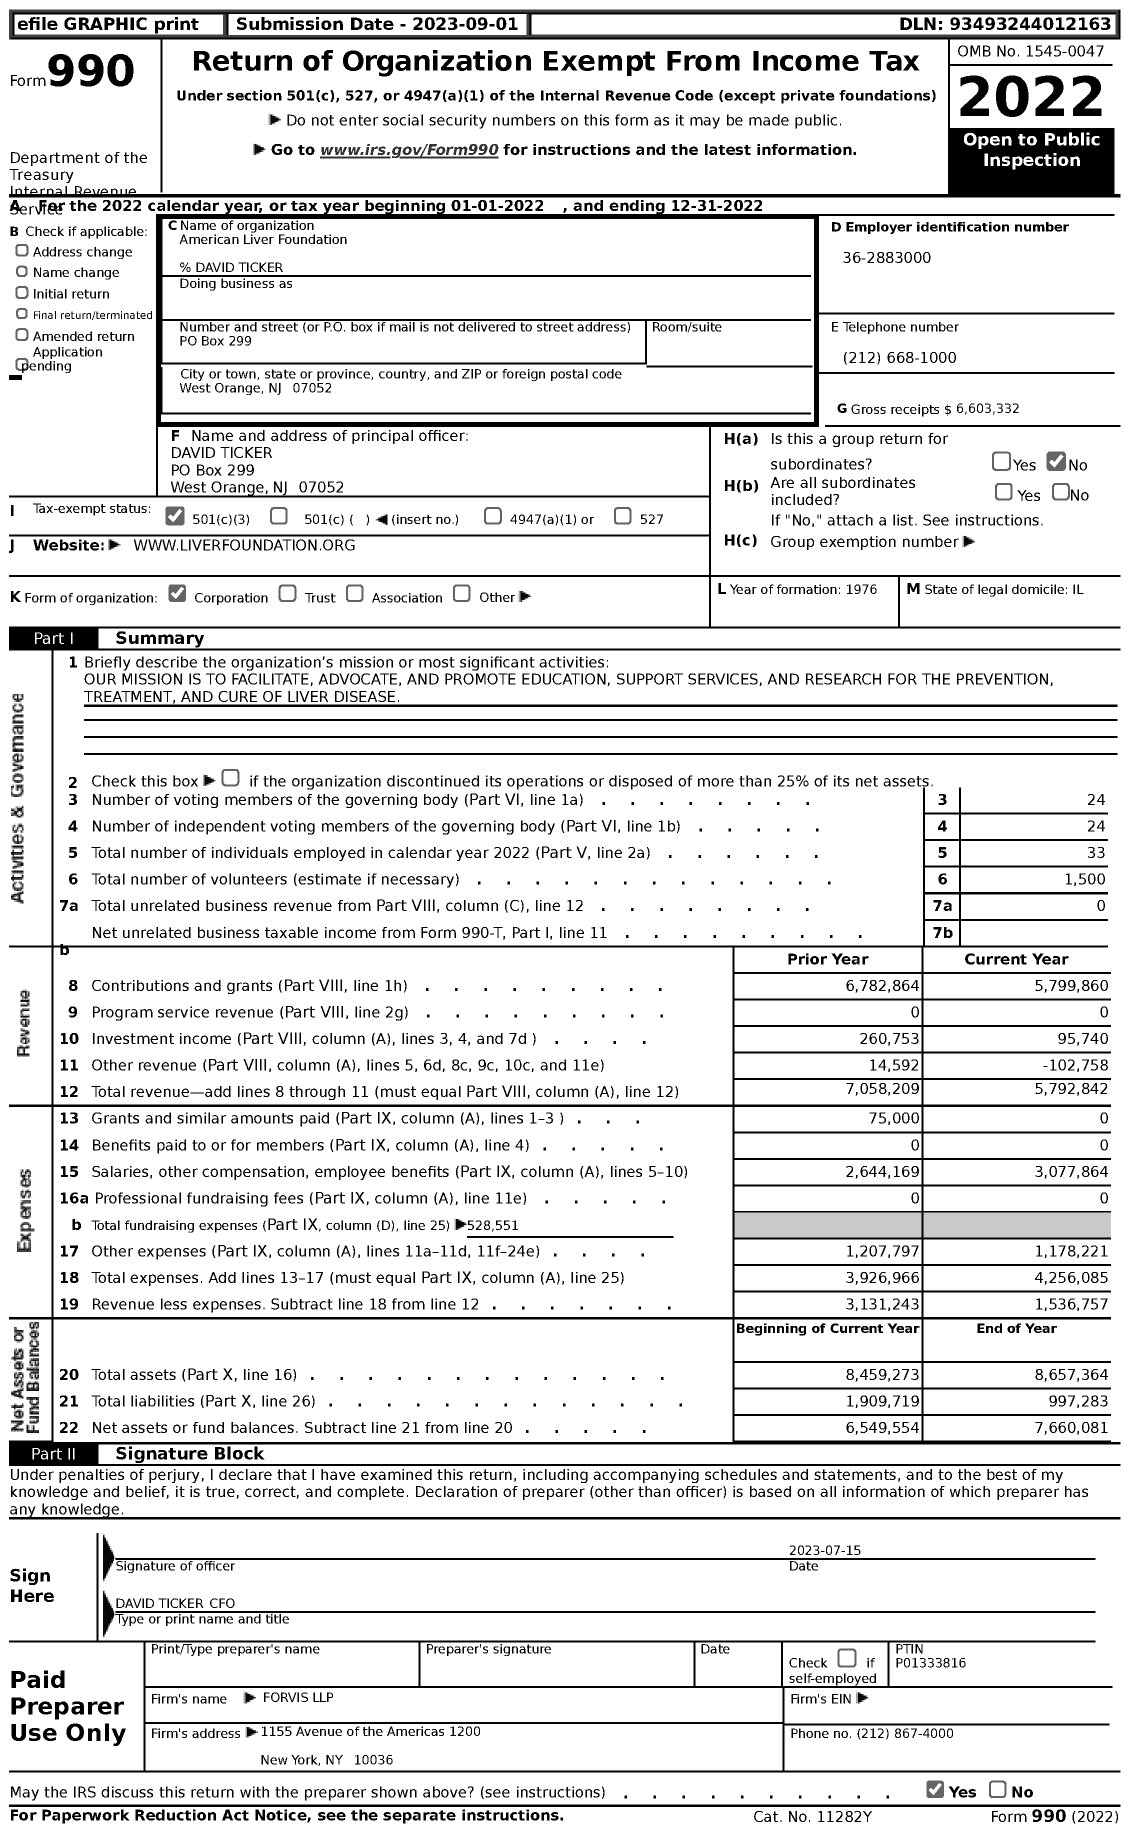 Image of first page of 2022 Form 990 for American Liver Foundation (ALF)